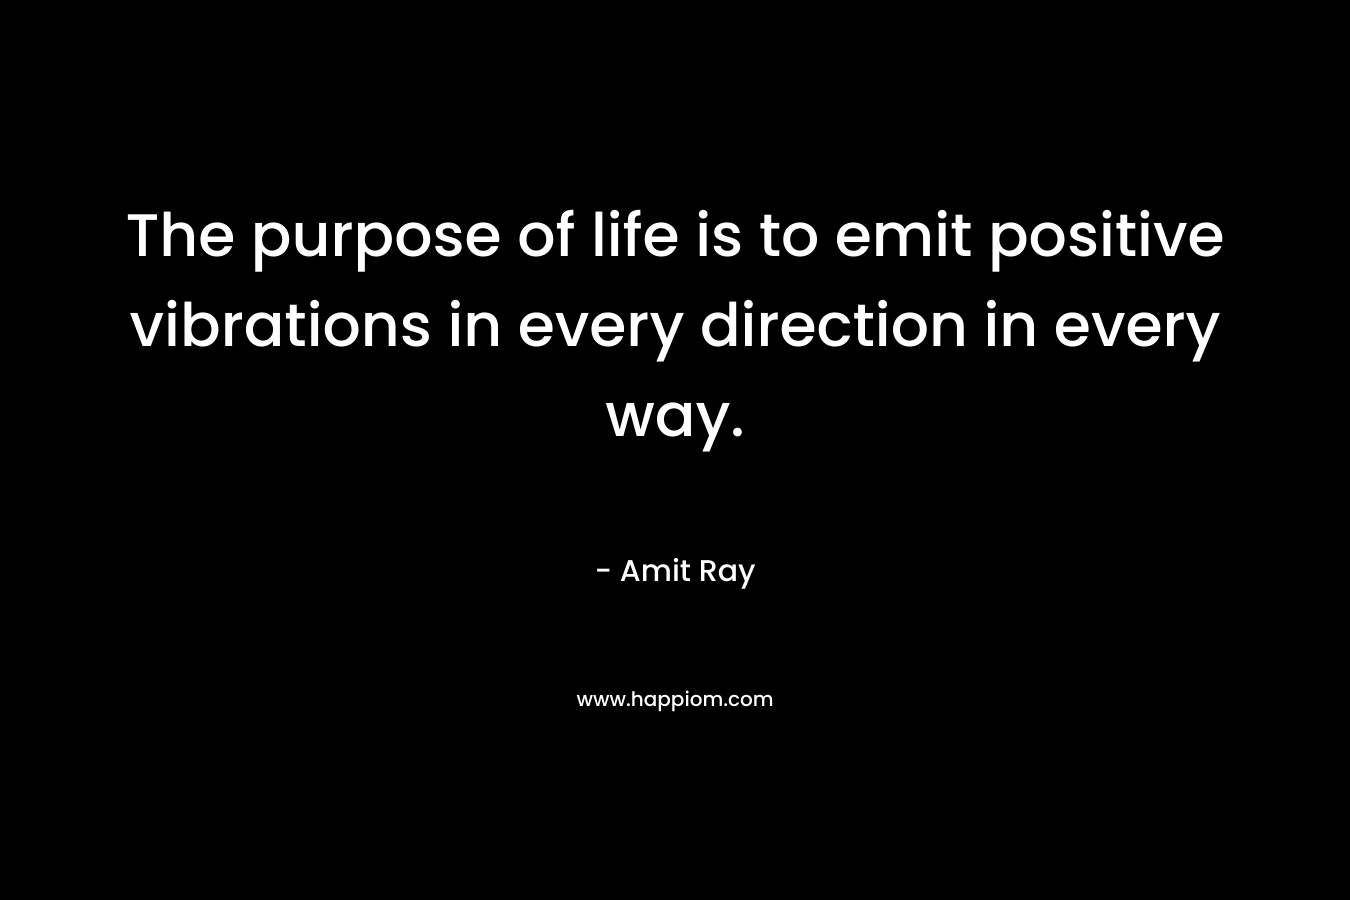 The purpose of life is to emit positive vibrations in every direction in every way.